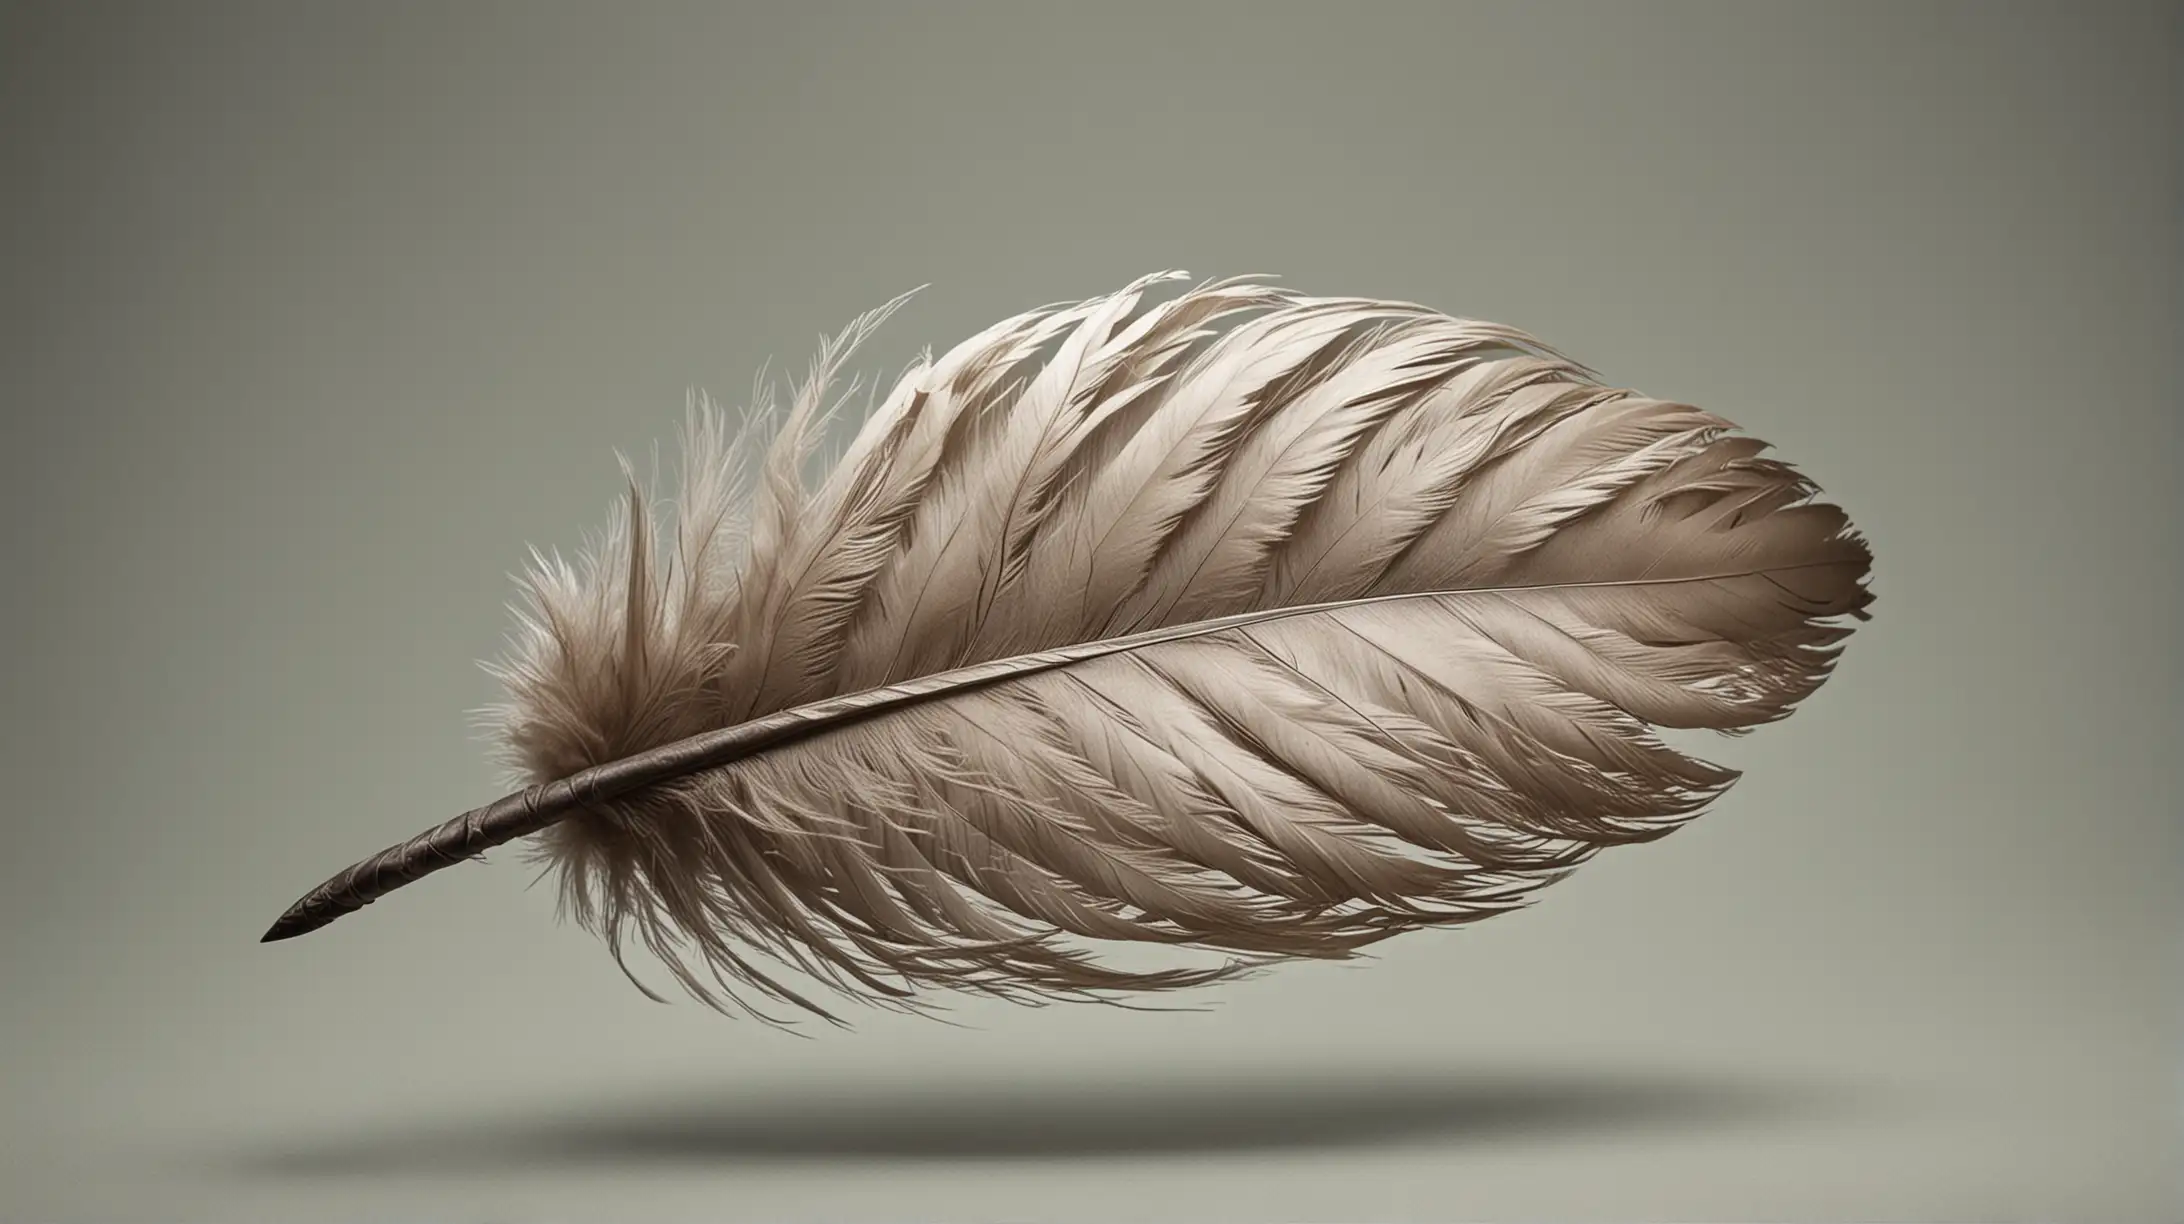 Floating Curled Feather on Simple Background